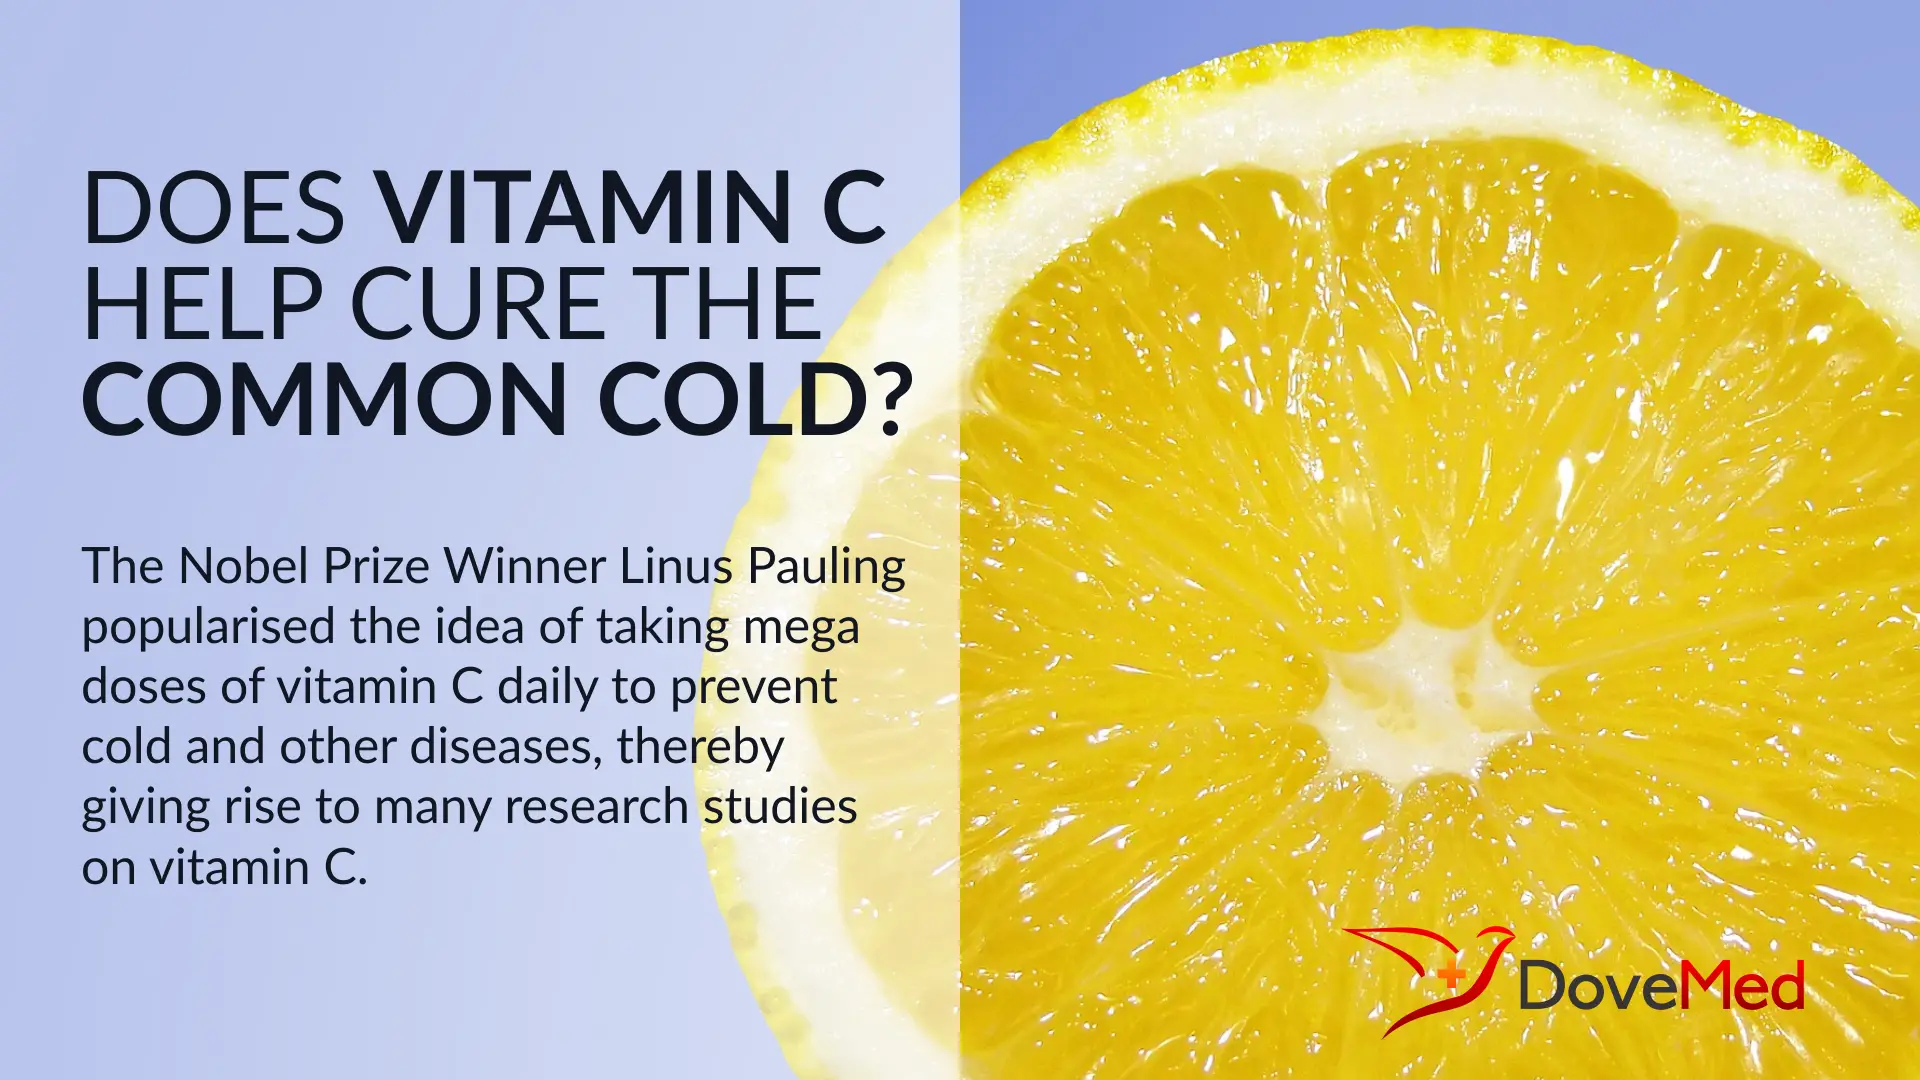 Does Vitamin C Help Cure The Common Cold?